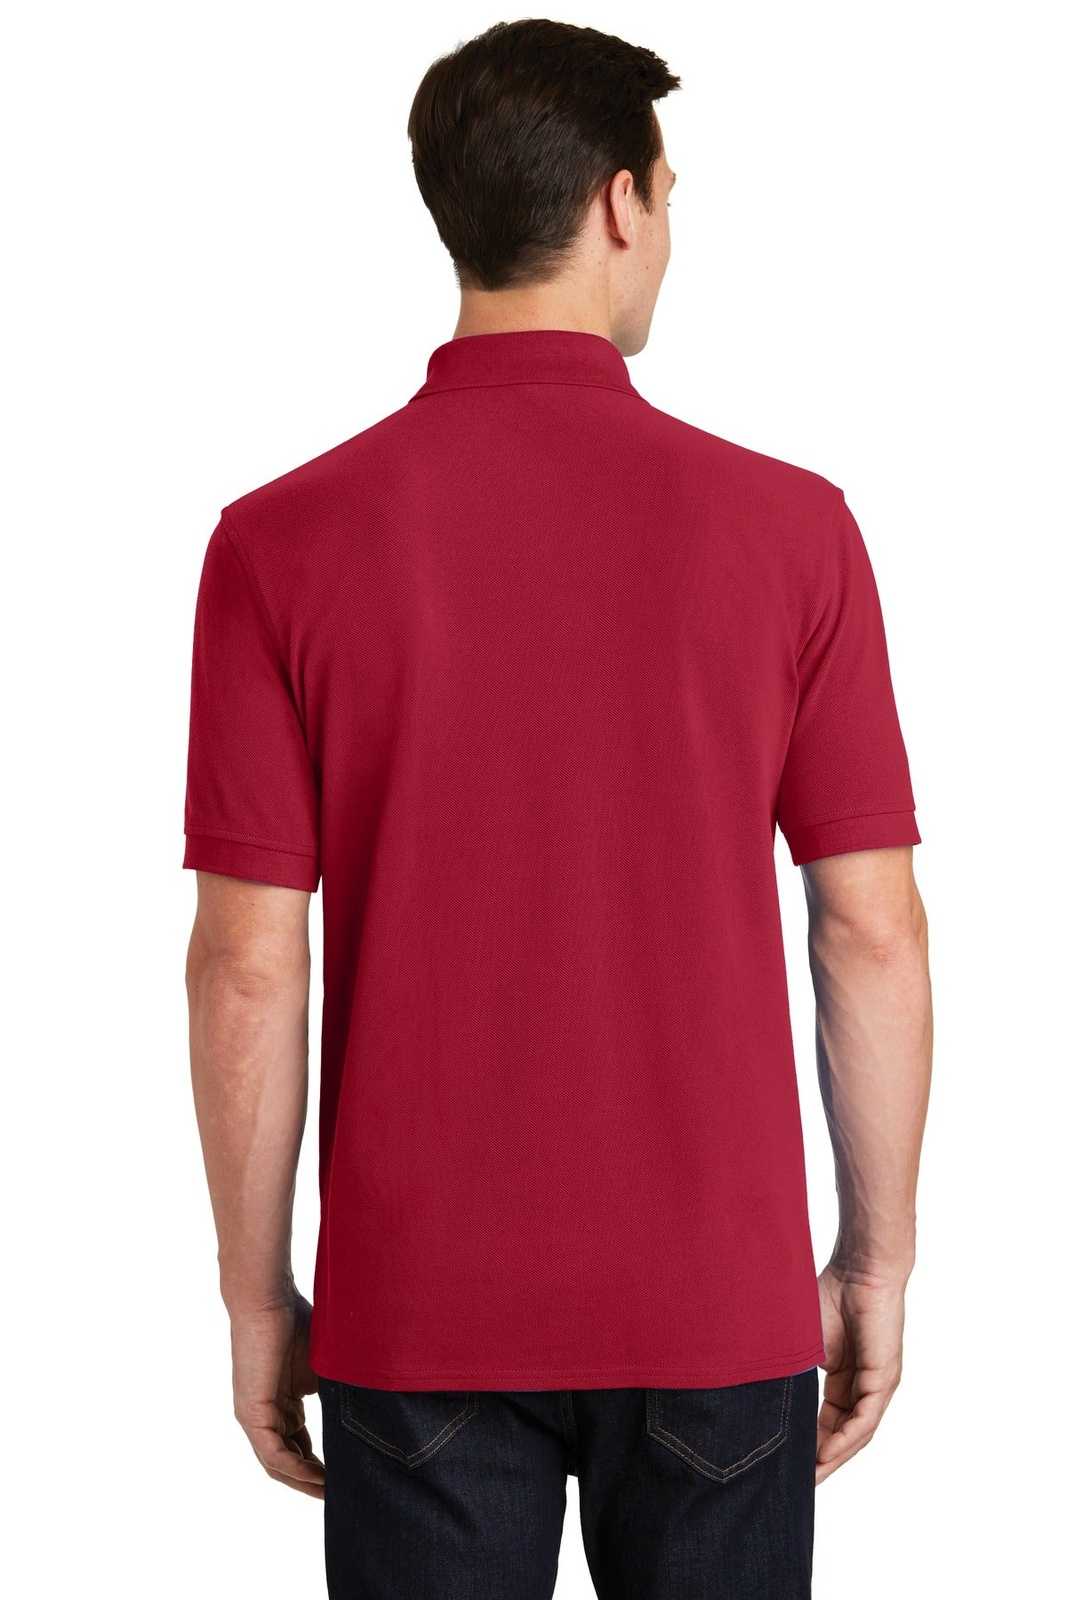 Port &amp; Company KP1500 Combed Ring Spun Pique Polo - Red - HIT a Double - 2